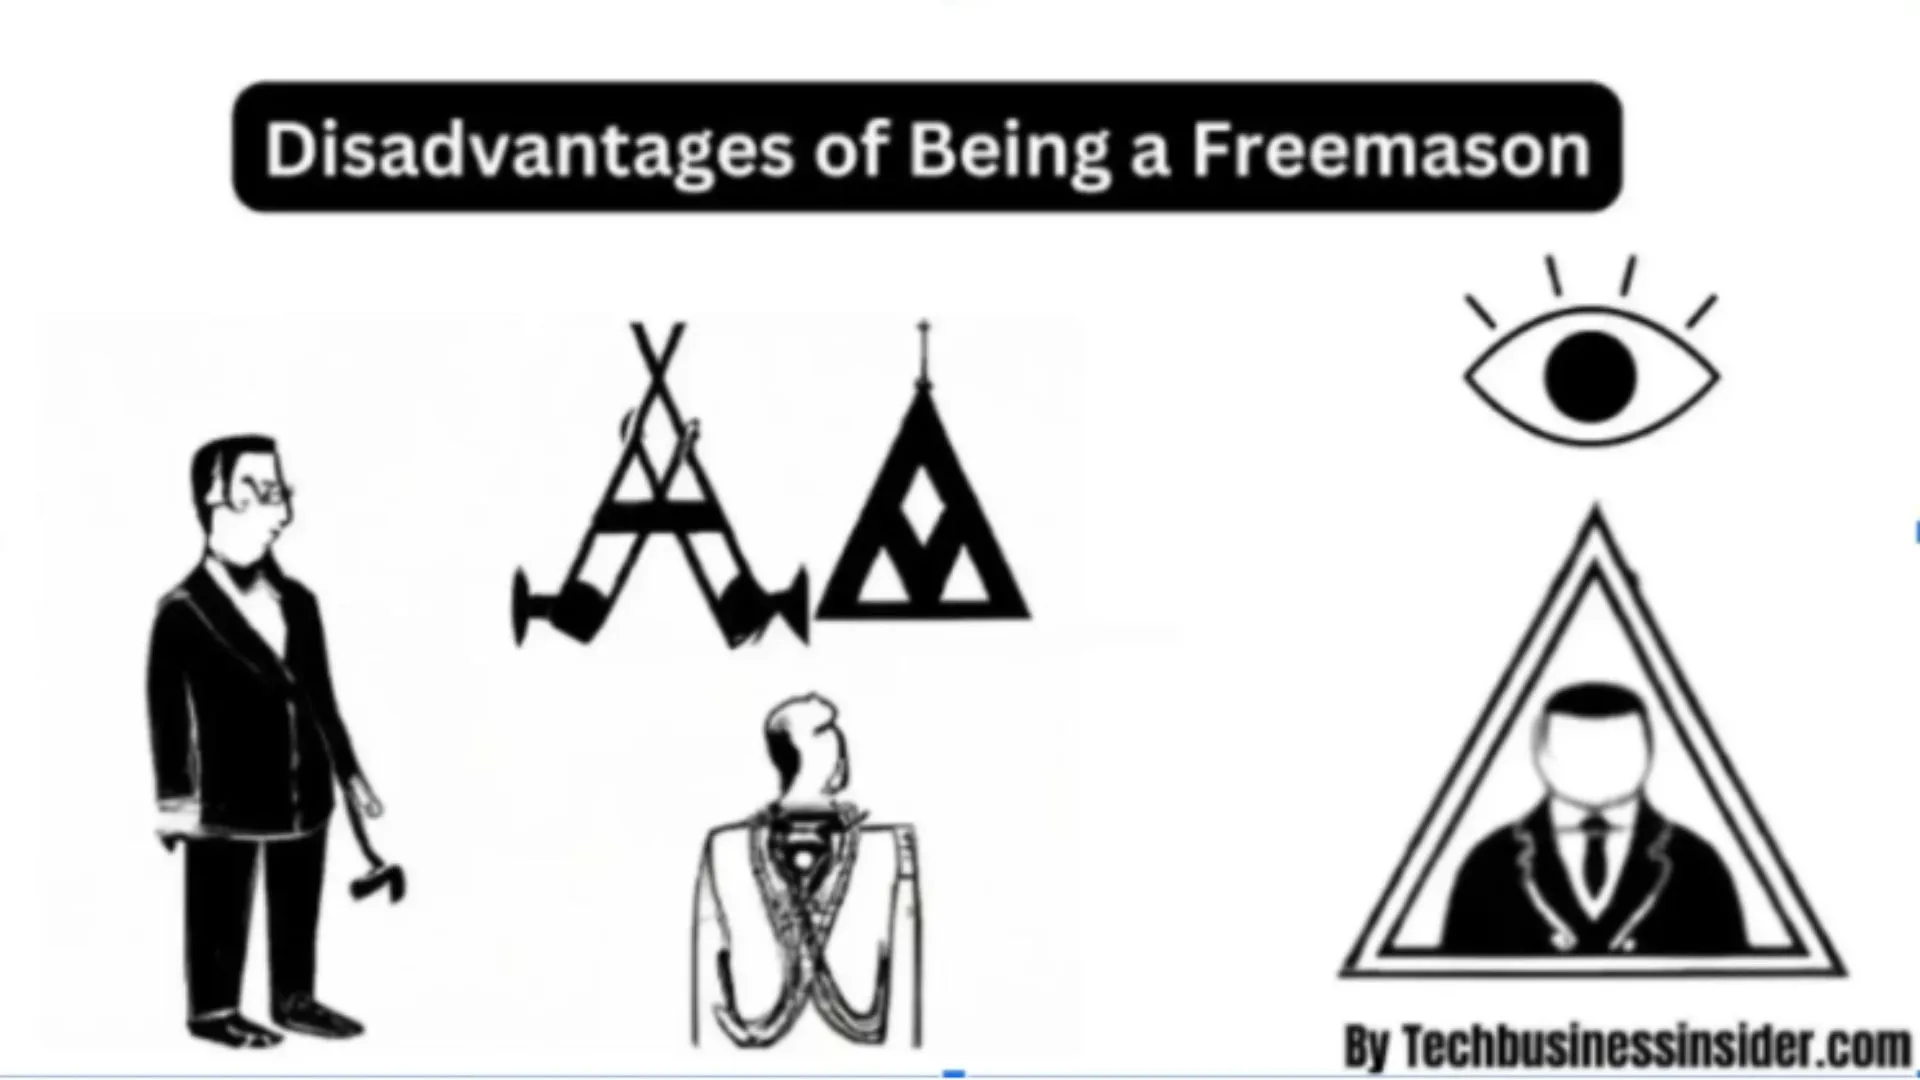 10 Disadvantages of Being a Freemason